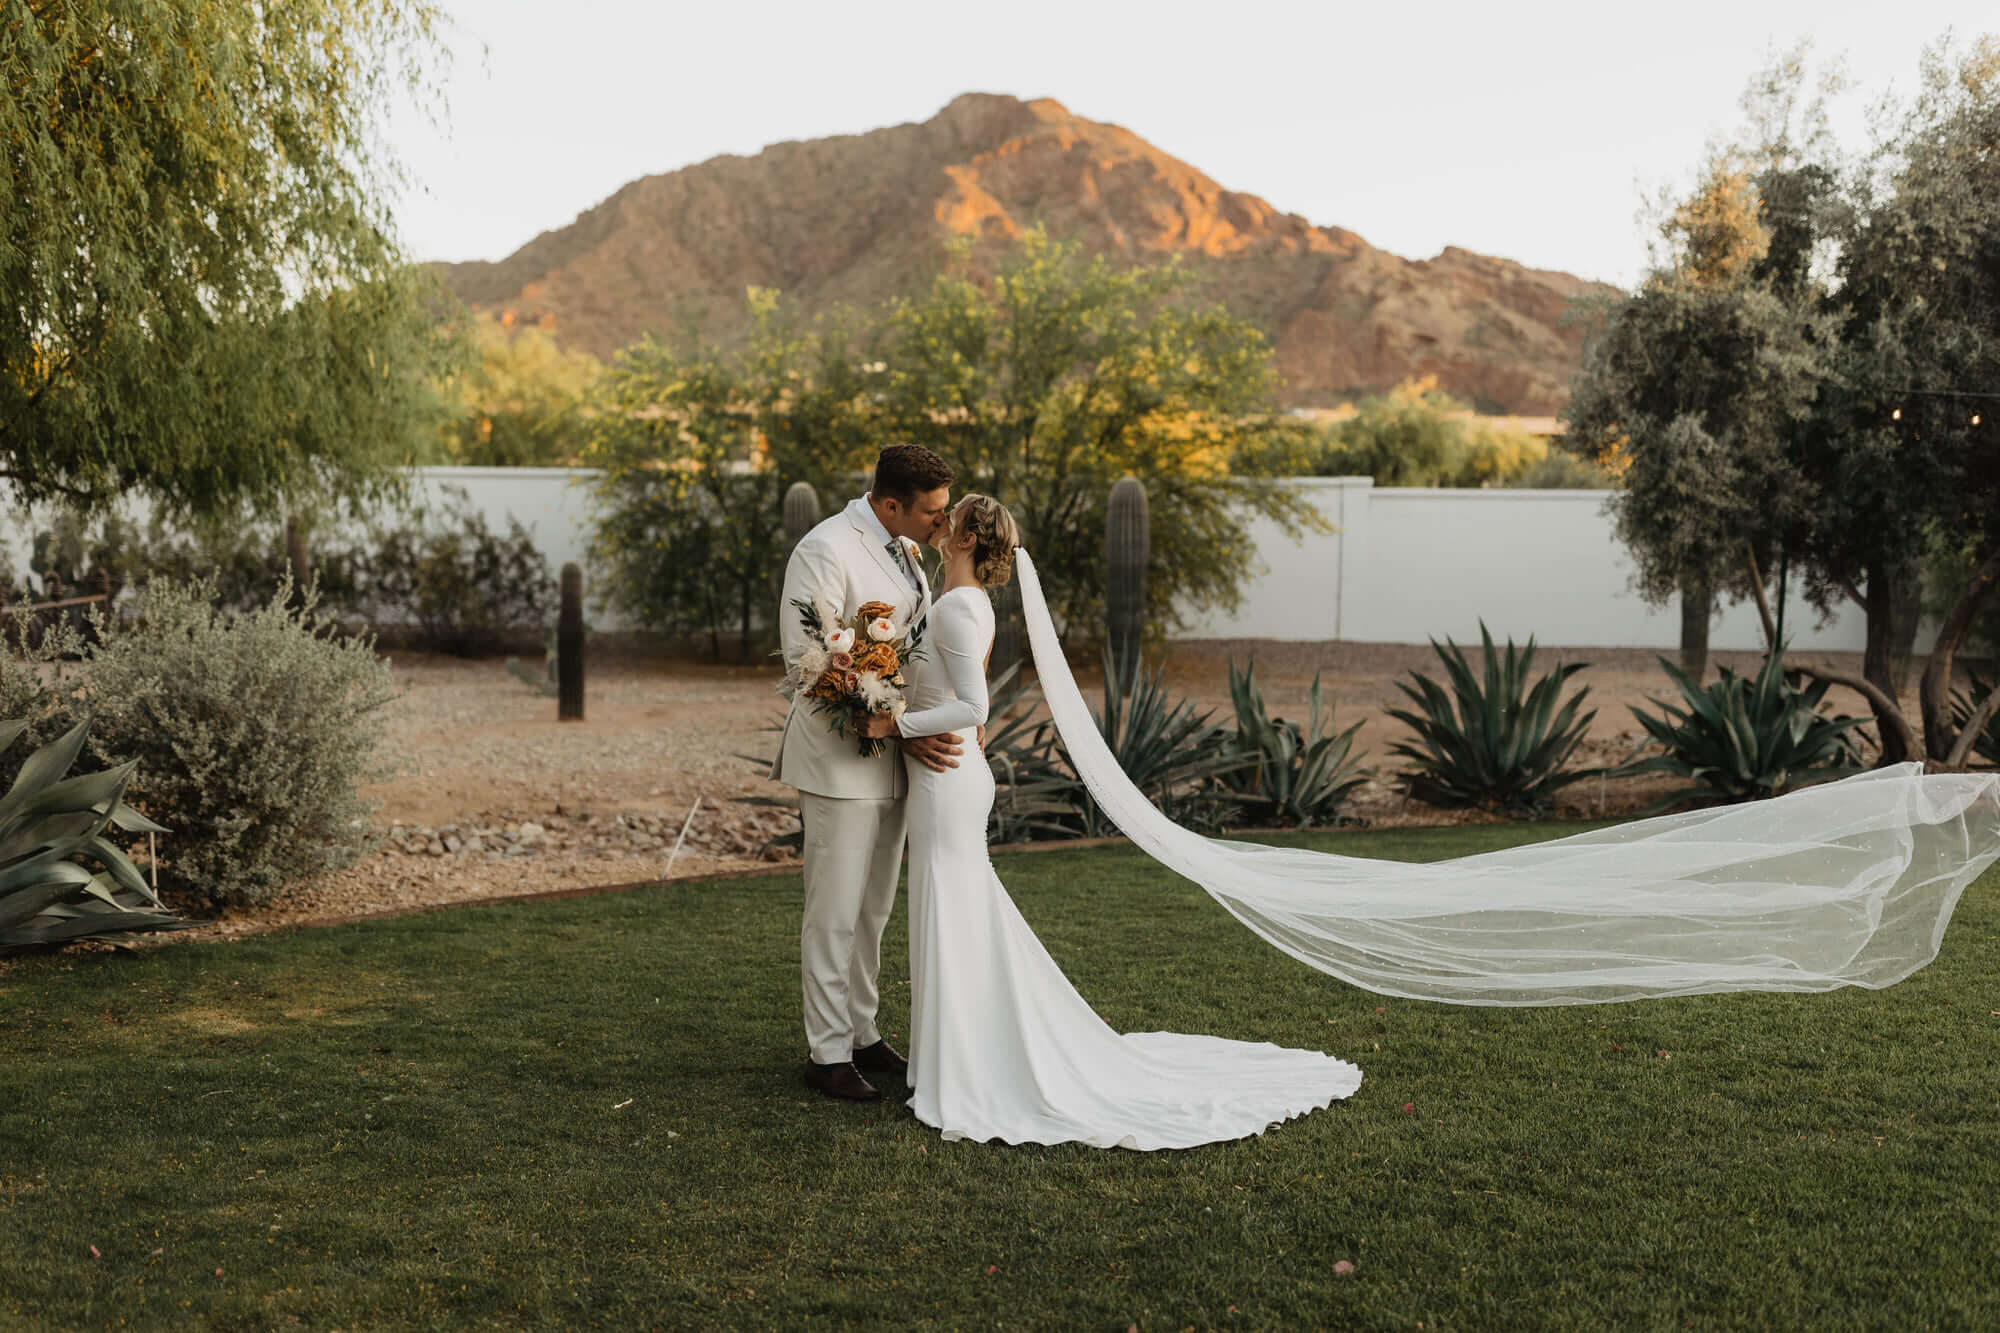 Bride and Groom go in for a kiss as the Arizona sun sets in the background